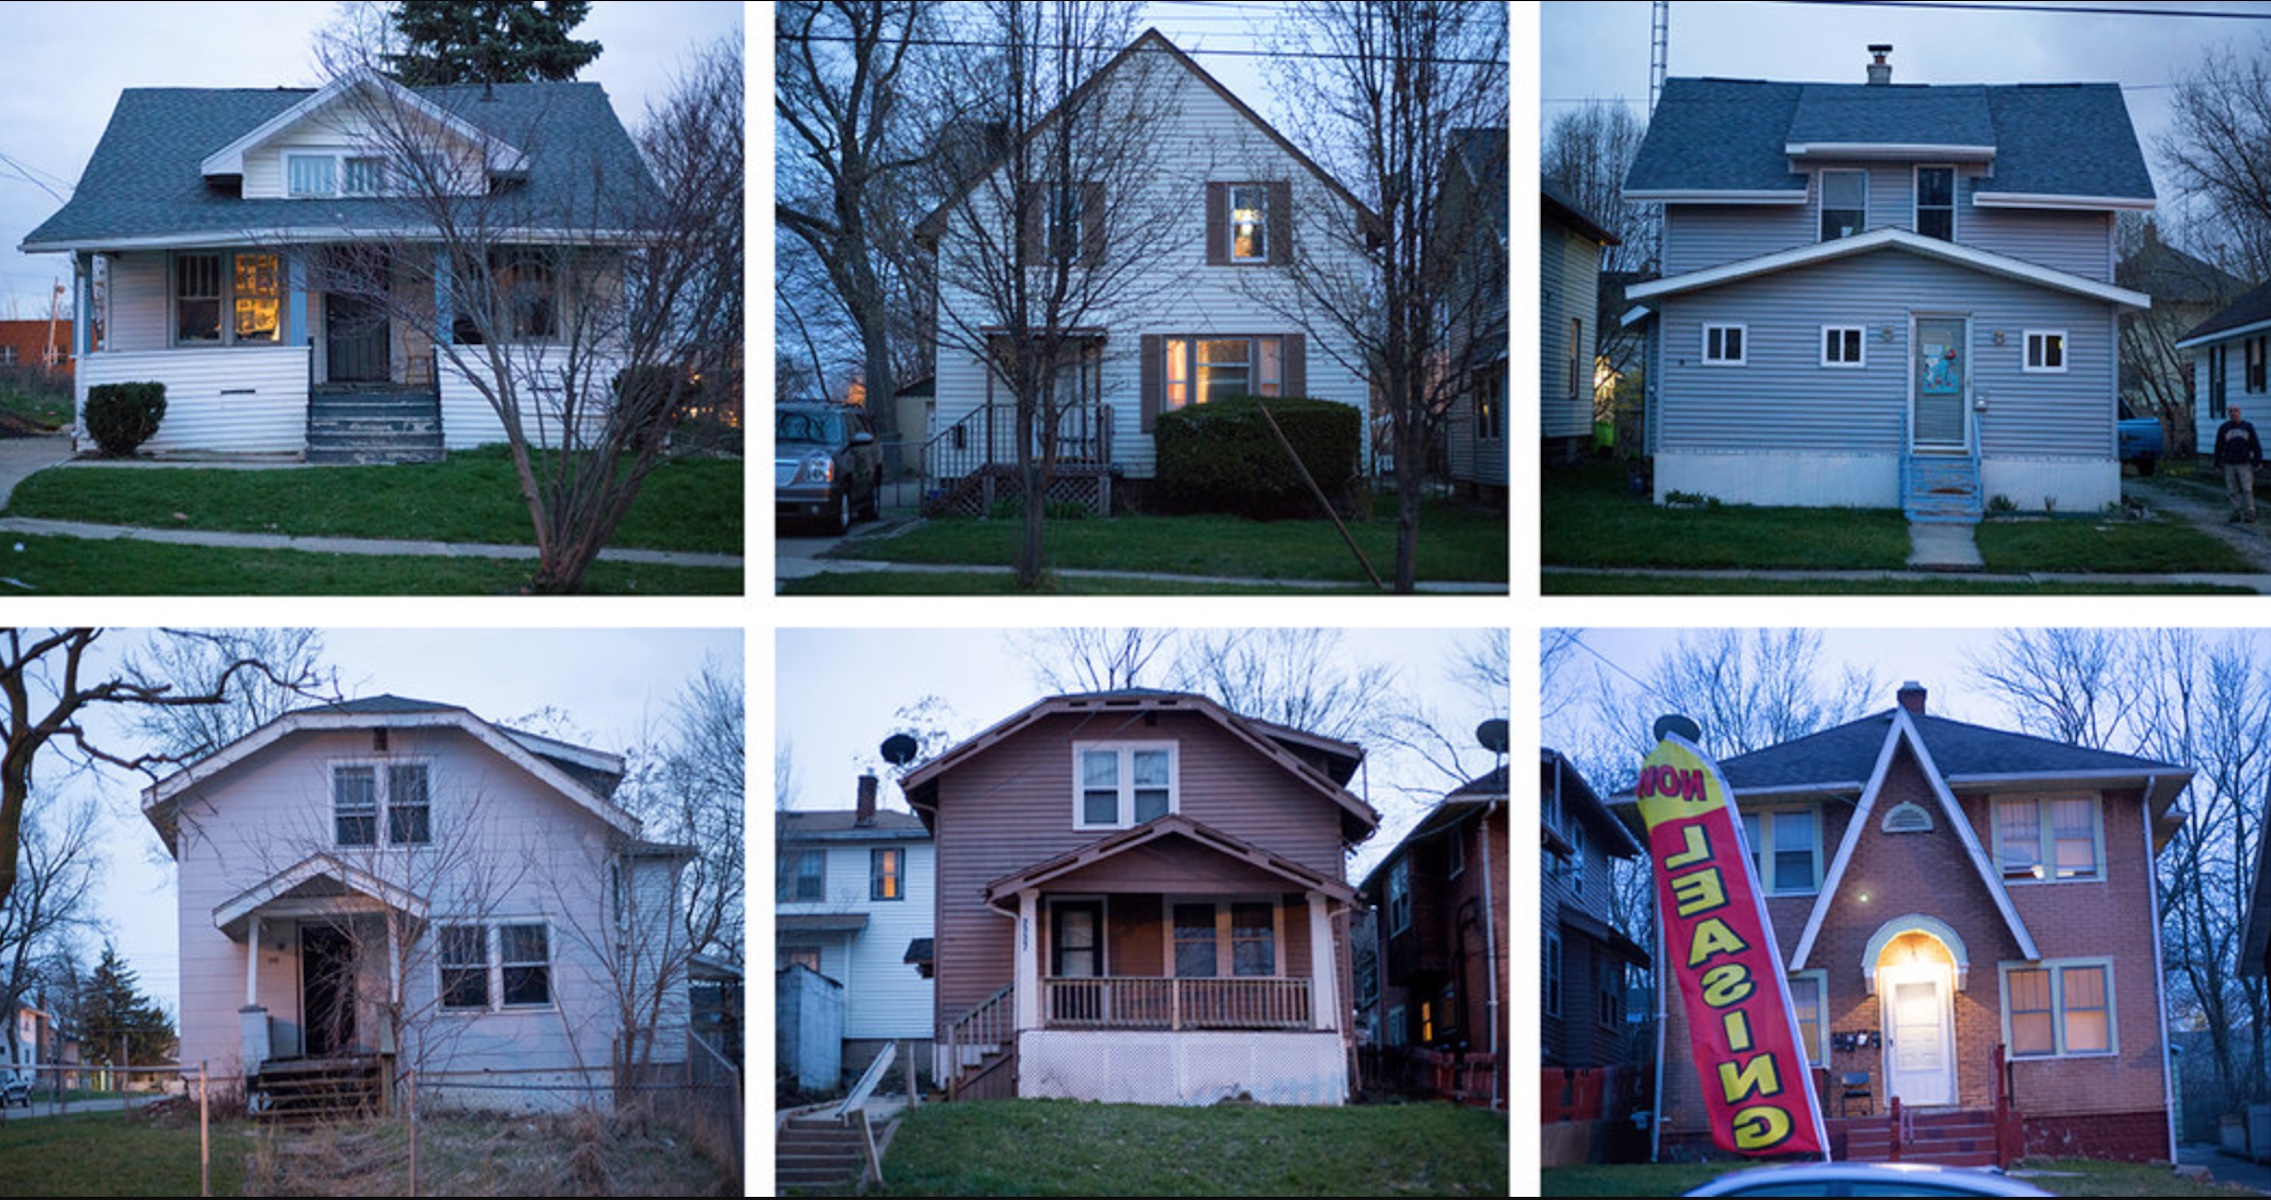 Photo of blighted homes in Flint, Michigan